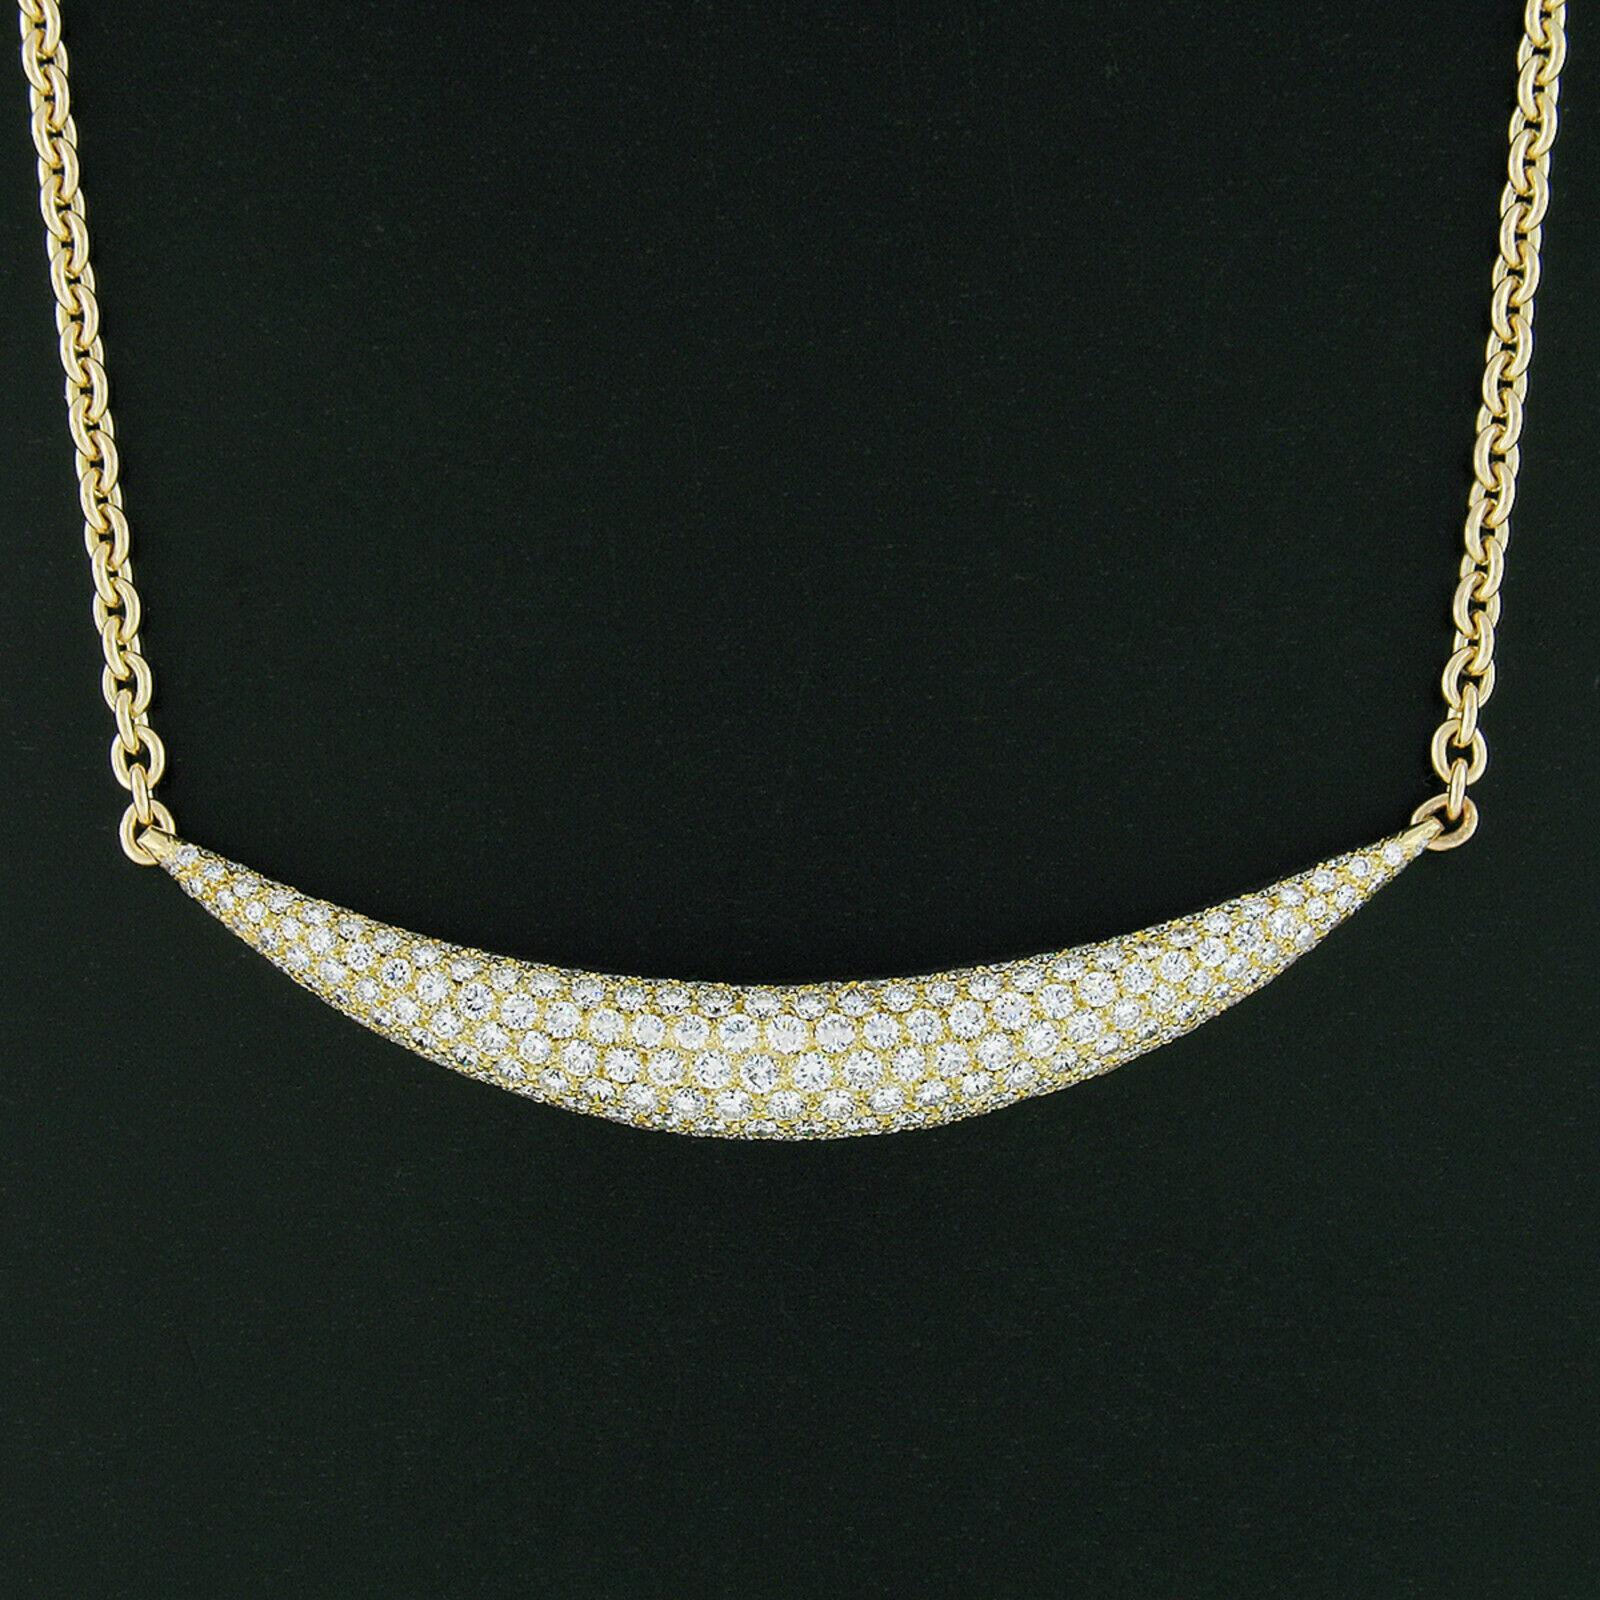 Round Cut 18k Yellow Gold 6.75ctw Top Quality Pave Round Diamond Curved Domed Bar Necklace